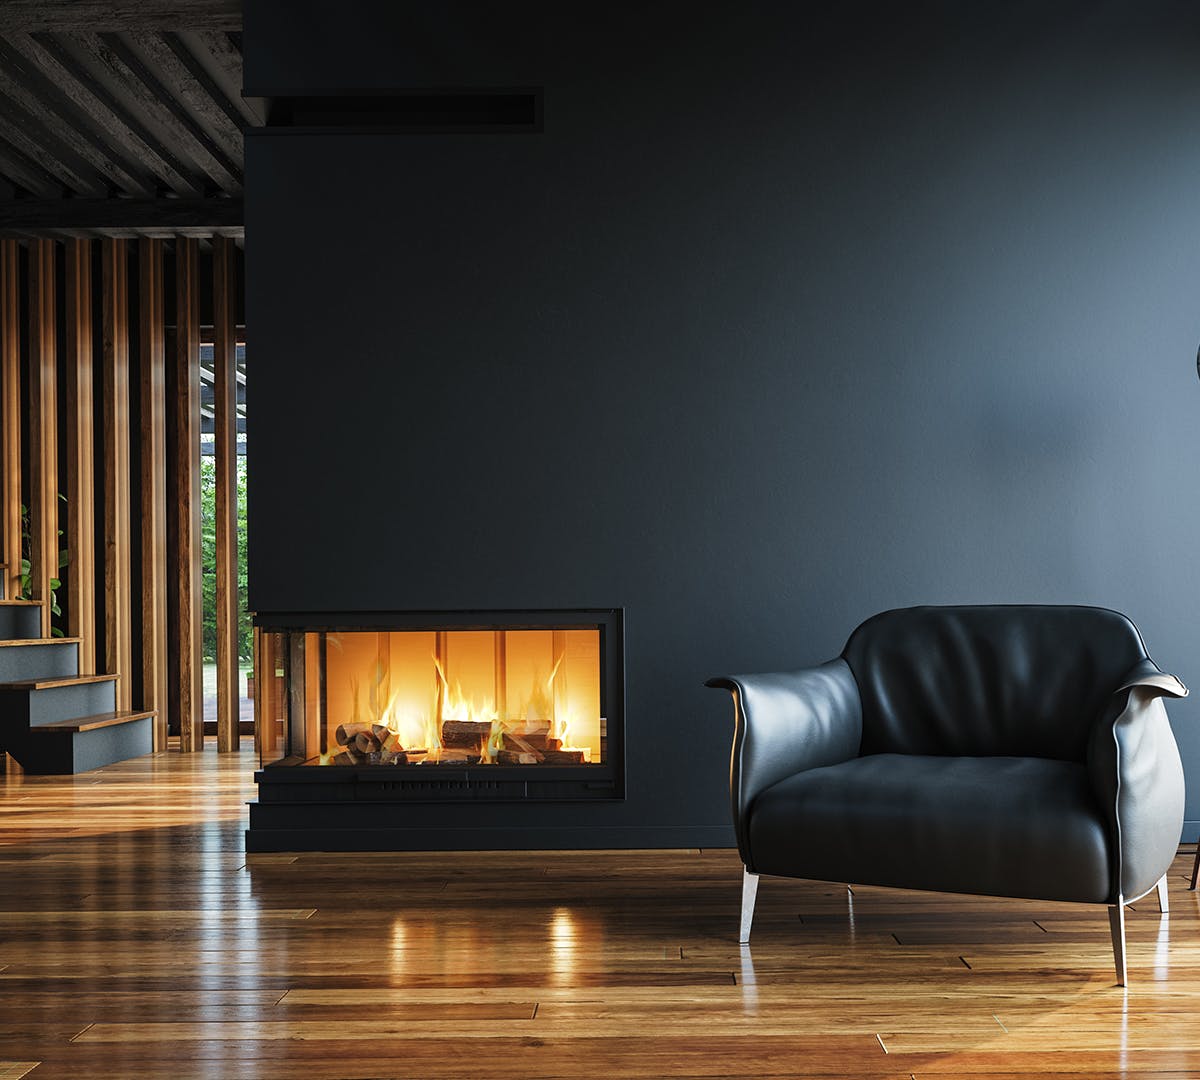 leather couch by fireplace